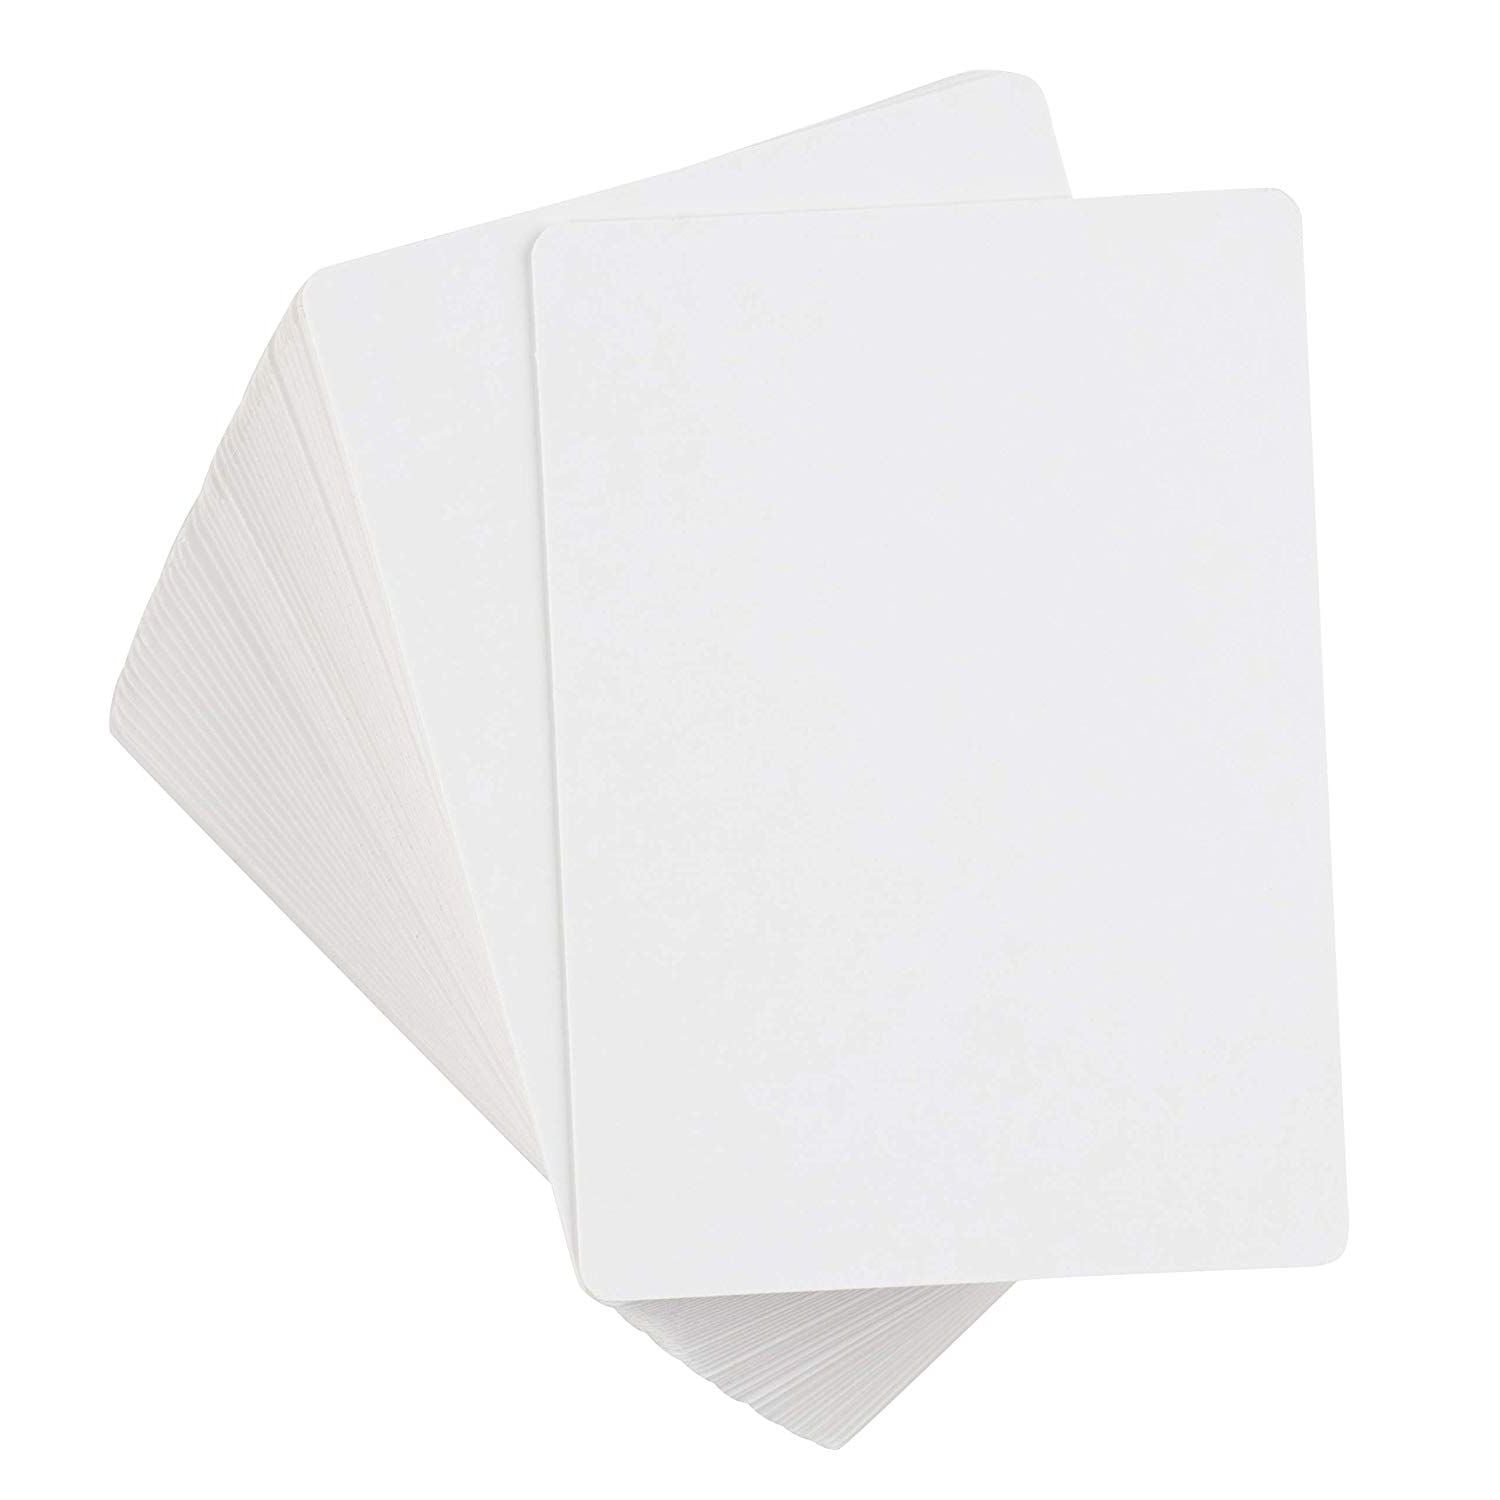 Blank Index Card 216 Piece White Cardstock Flash Cards Note Cards Perfect For Diy Game Card Study School Language Learning Memory Game 4 Gsm 2 5 X 3 5 Inches Walmart Com Walmart Com